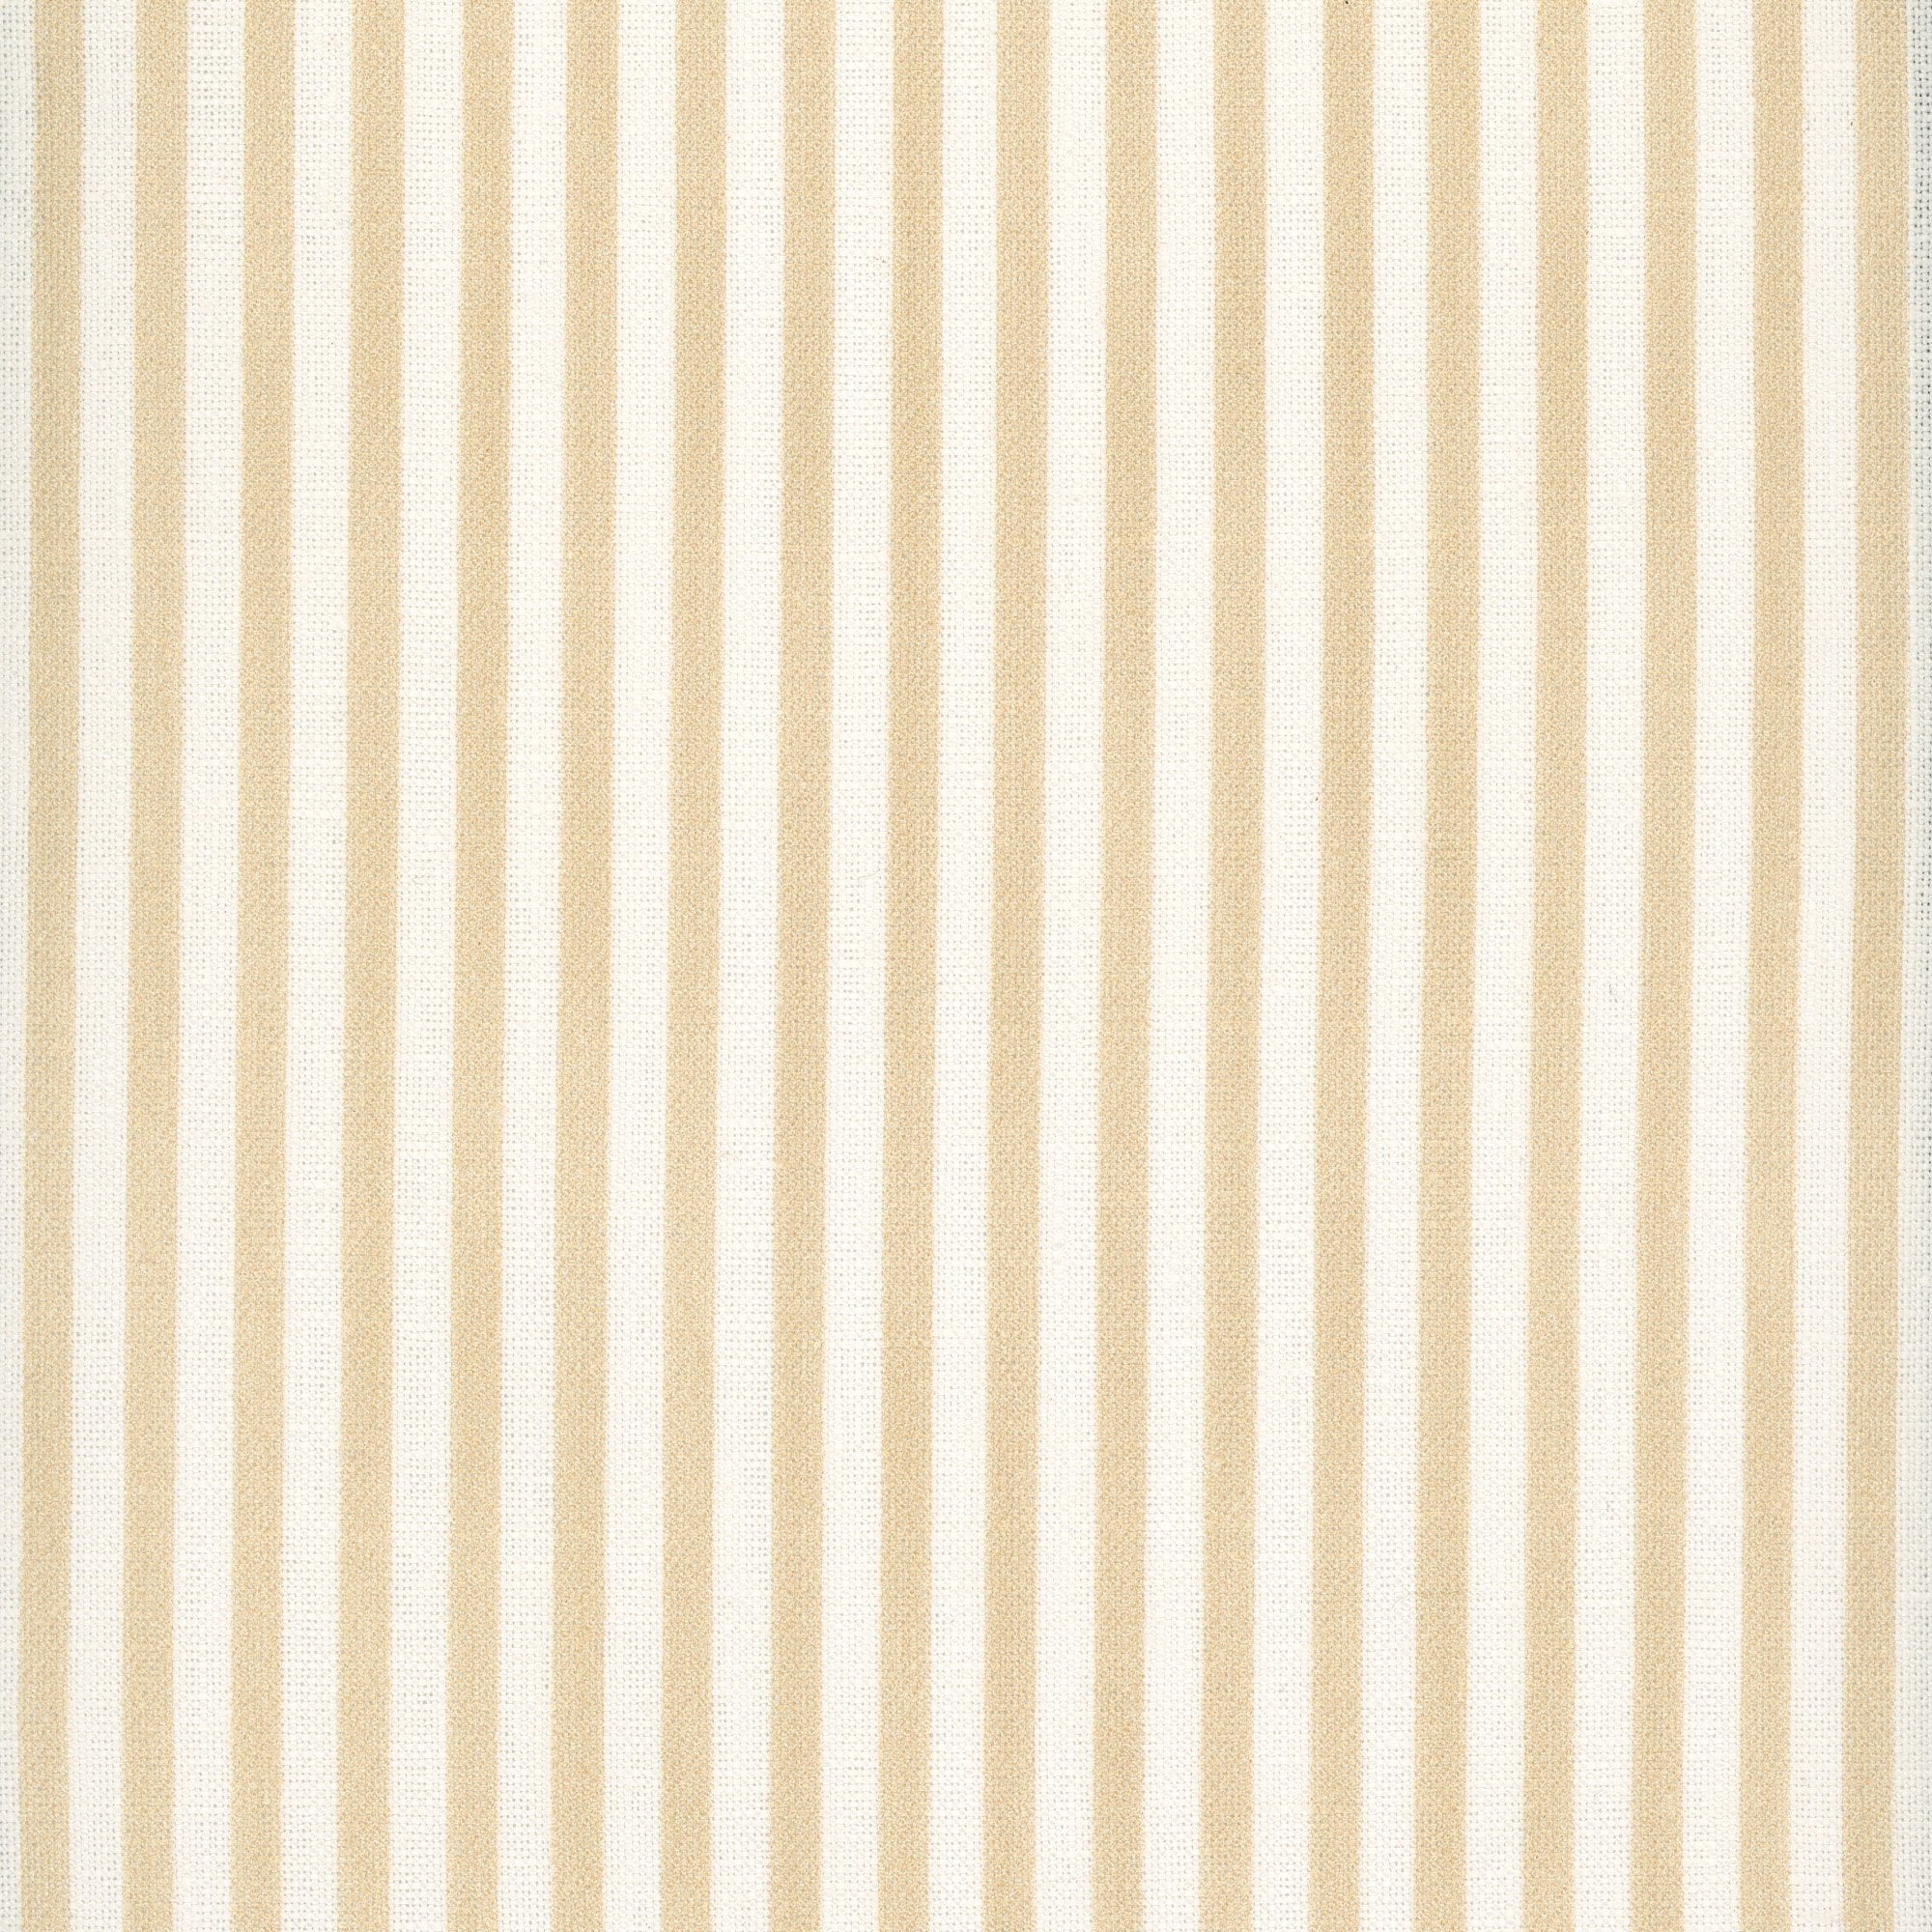 Painted Pin Stripe - Sand